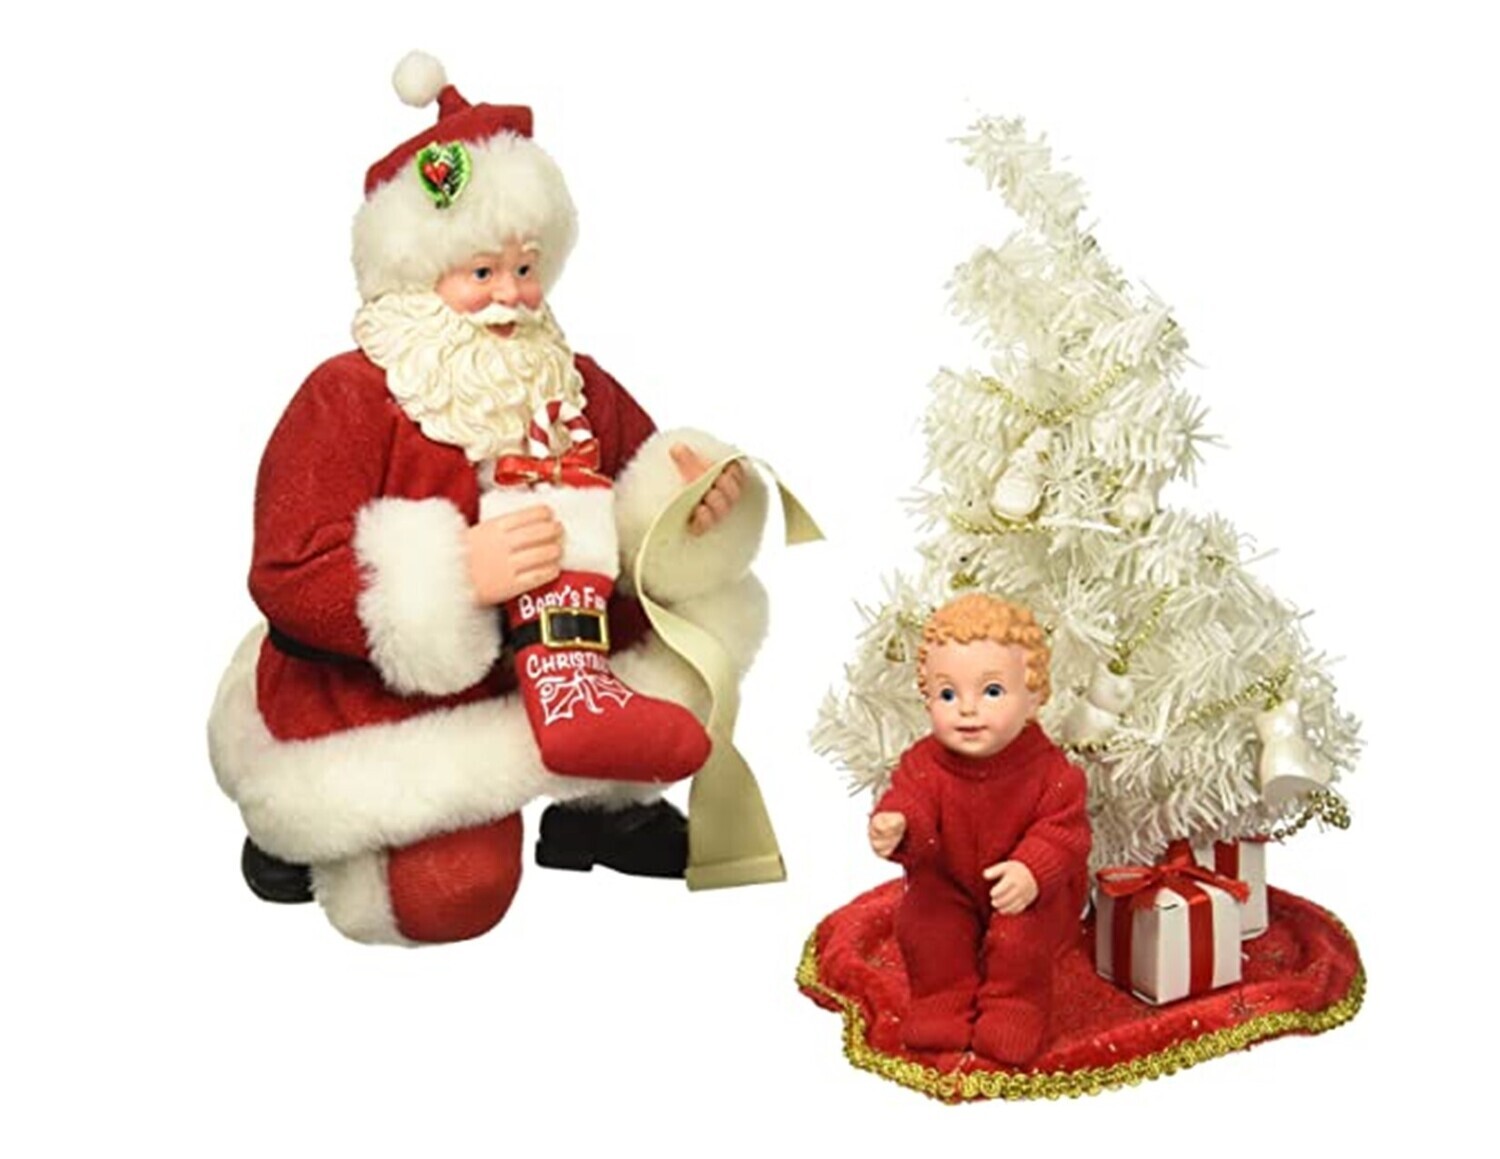 Possible Dreams "Baby's First Christmas Tree" Figurine 2 Pc Set